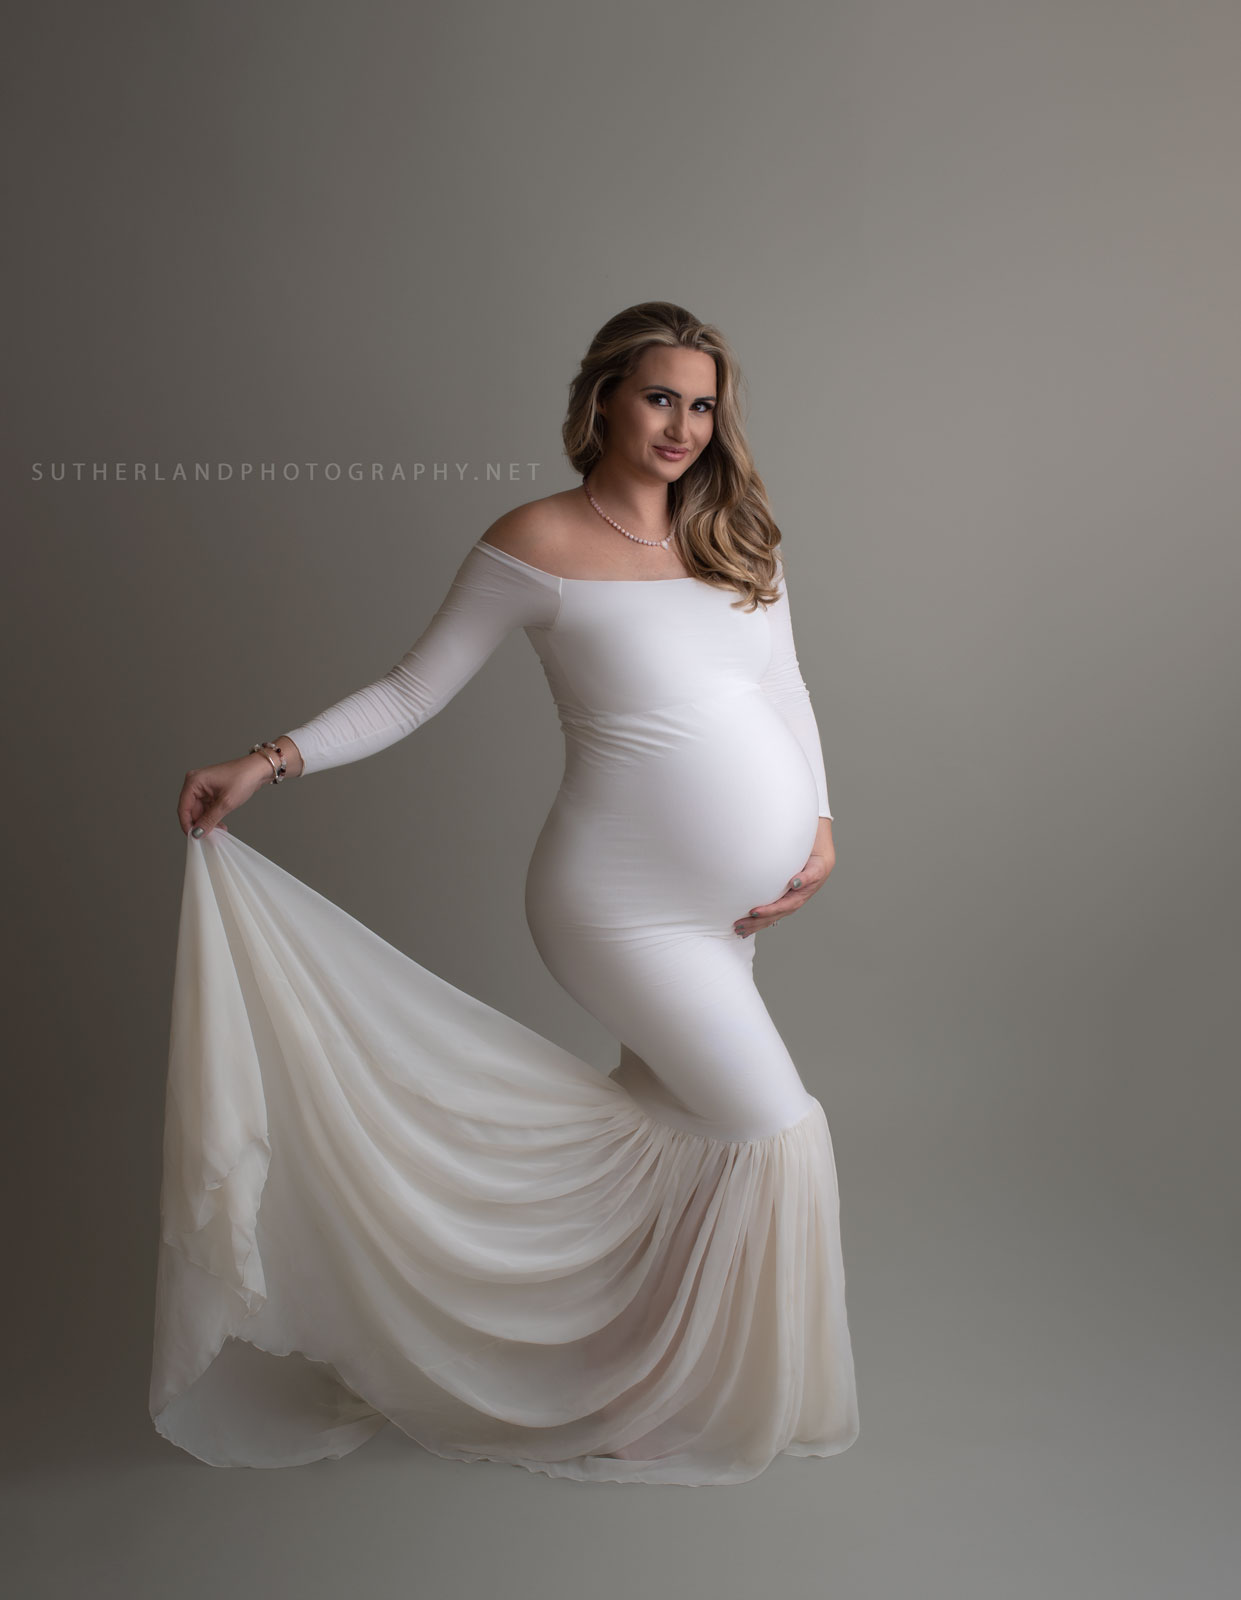 Mother to be stands in a studio wearing a white materrnity gown dancing for birth